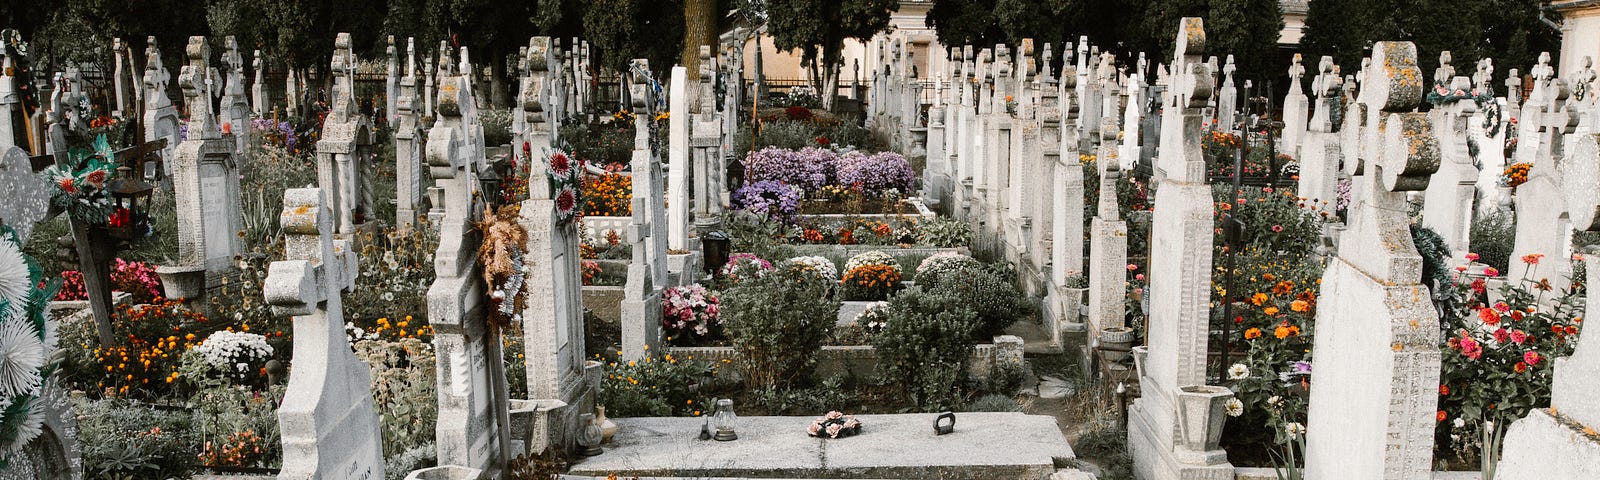 Photo of an old graveyard with dying flowers.